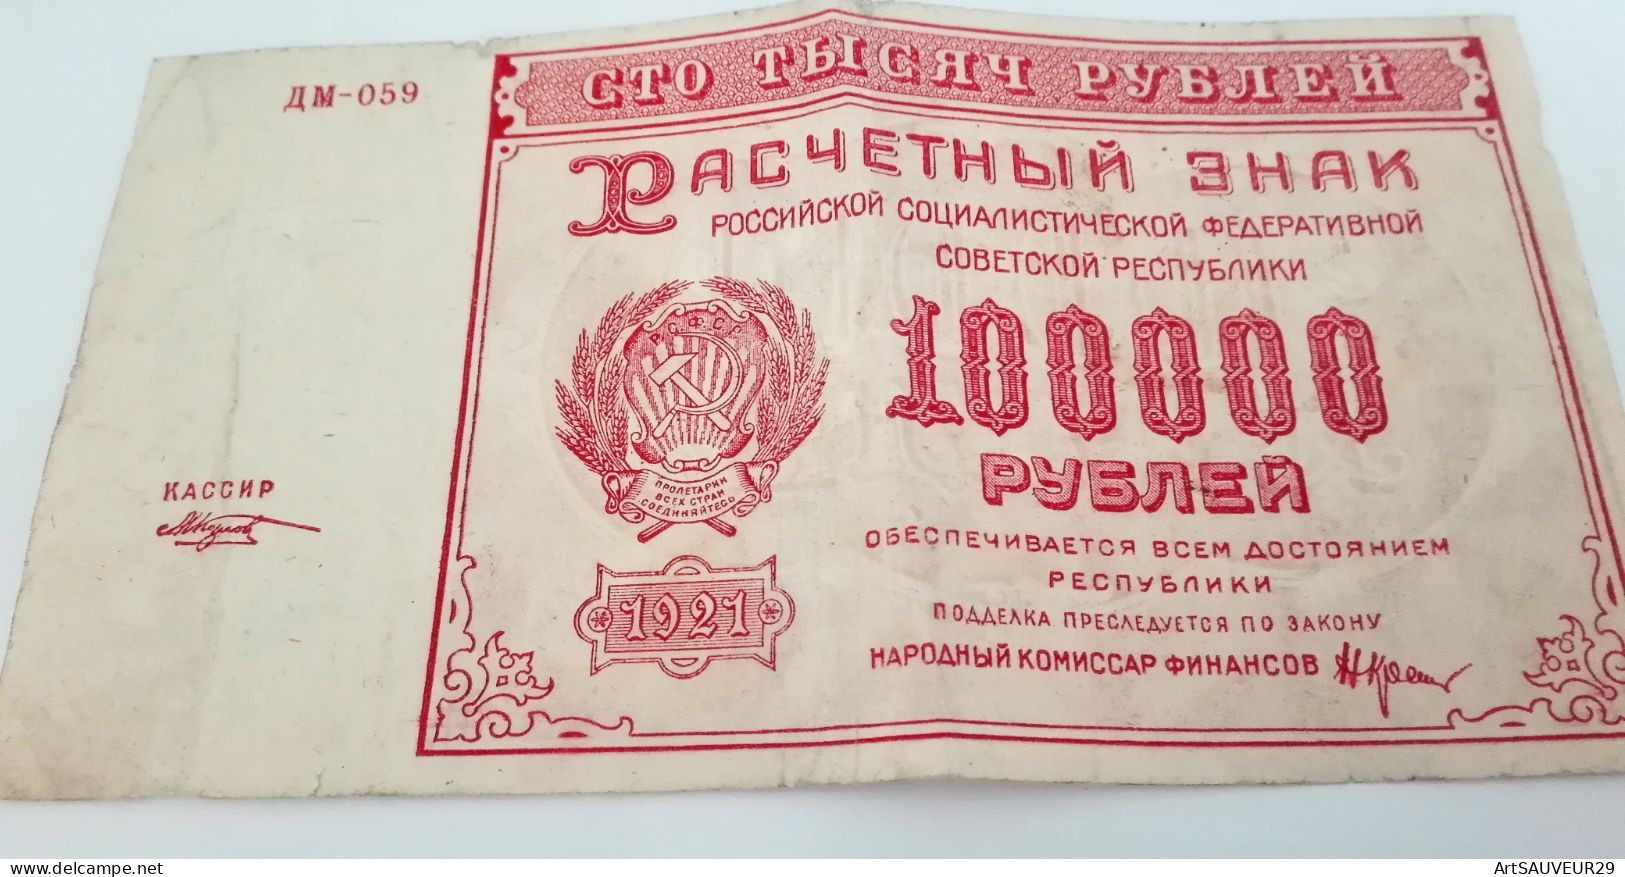 BILLET RUSSIE - 100.000 ROUBLES 1921 - Other - Europe